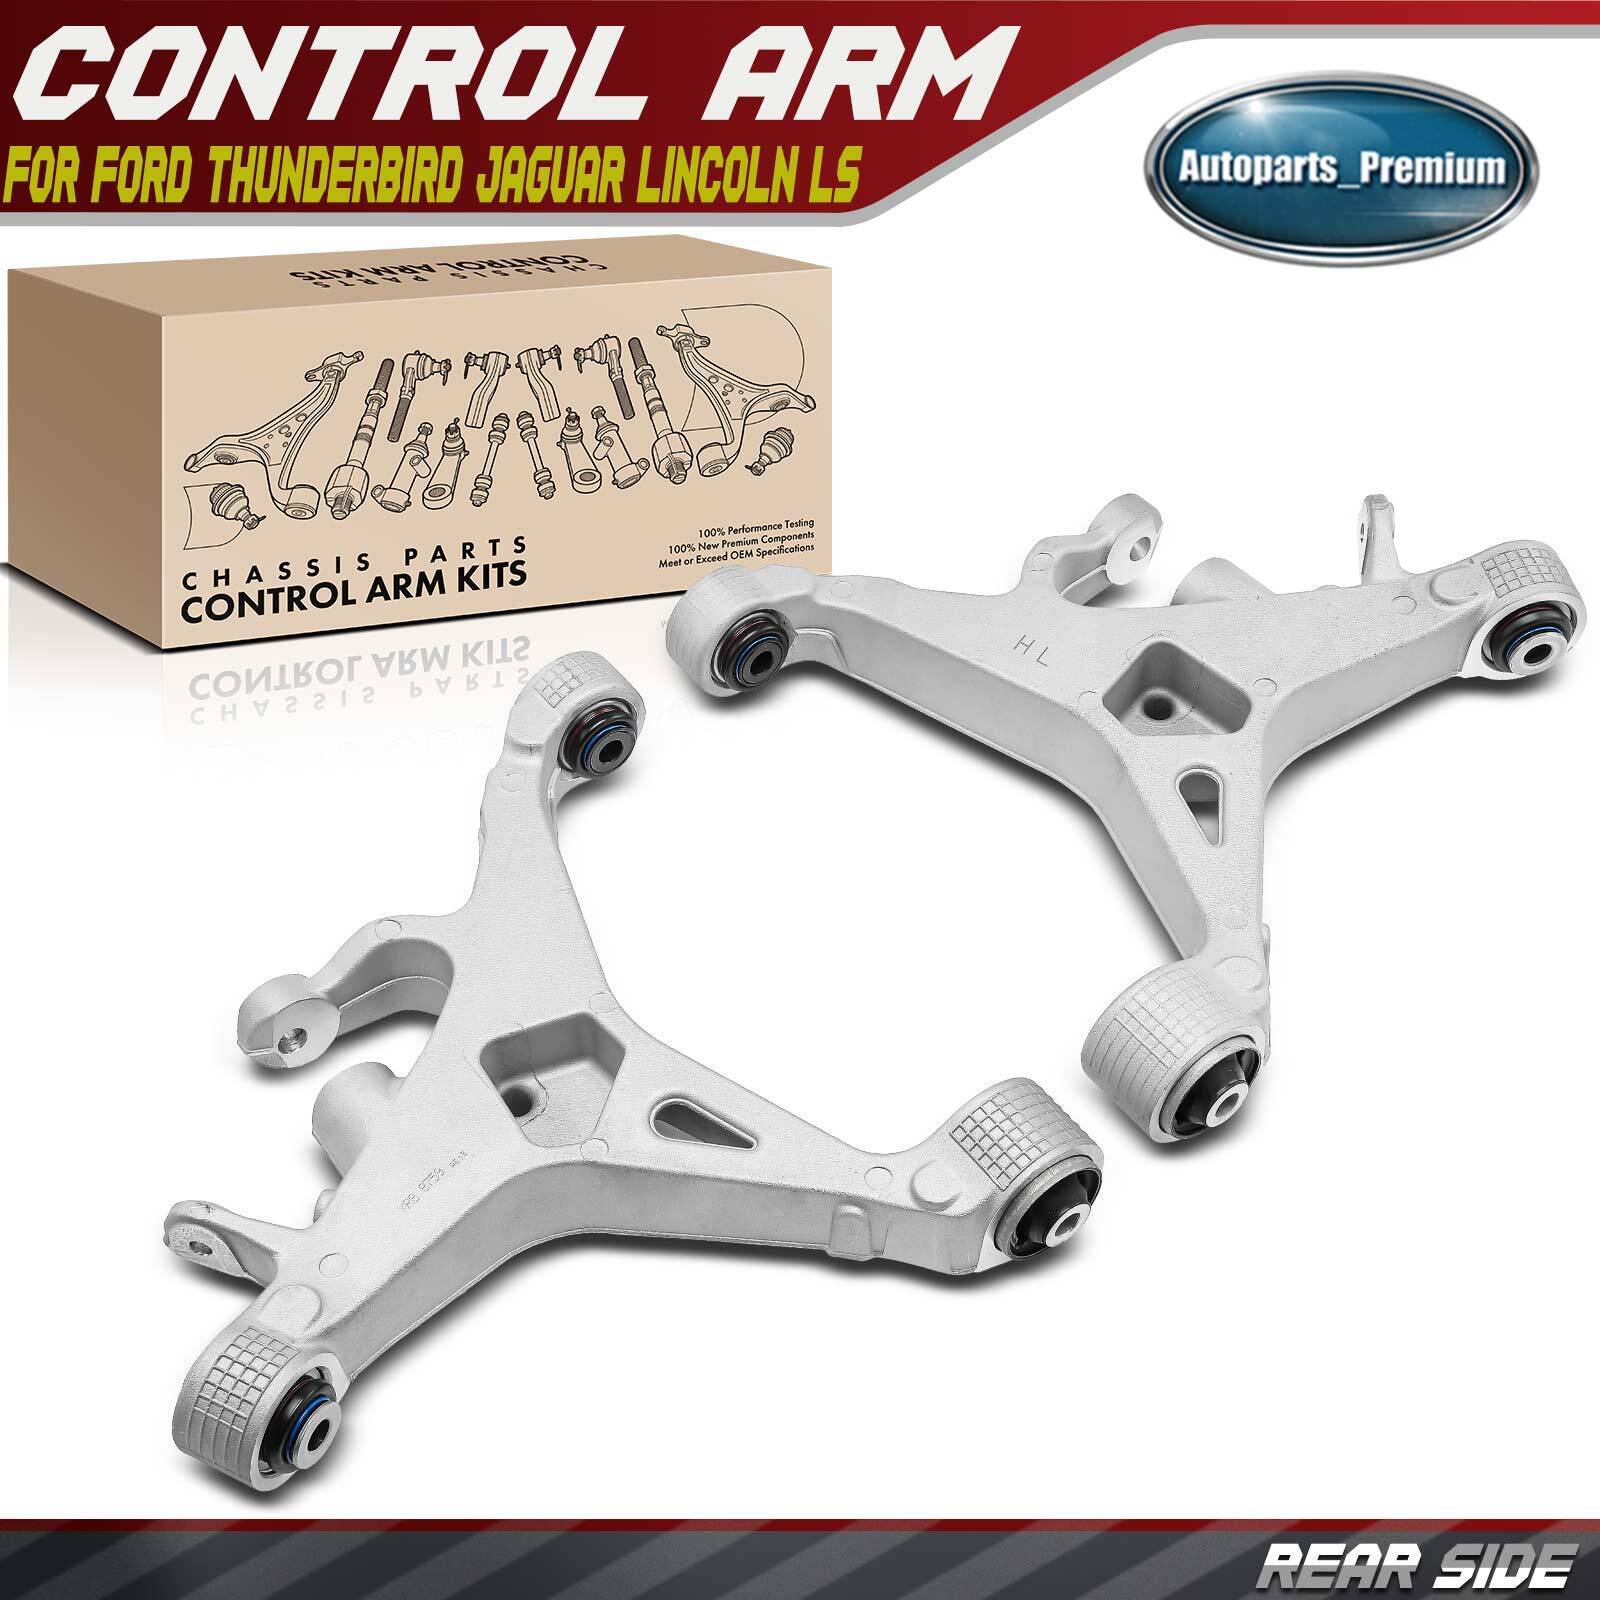 2Pcs Rear Left & Right Lower Control Arm for Ford Thunderbird Jaguar Lincoln LS